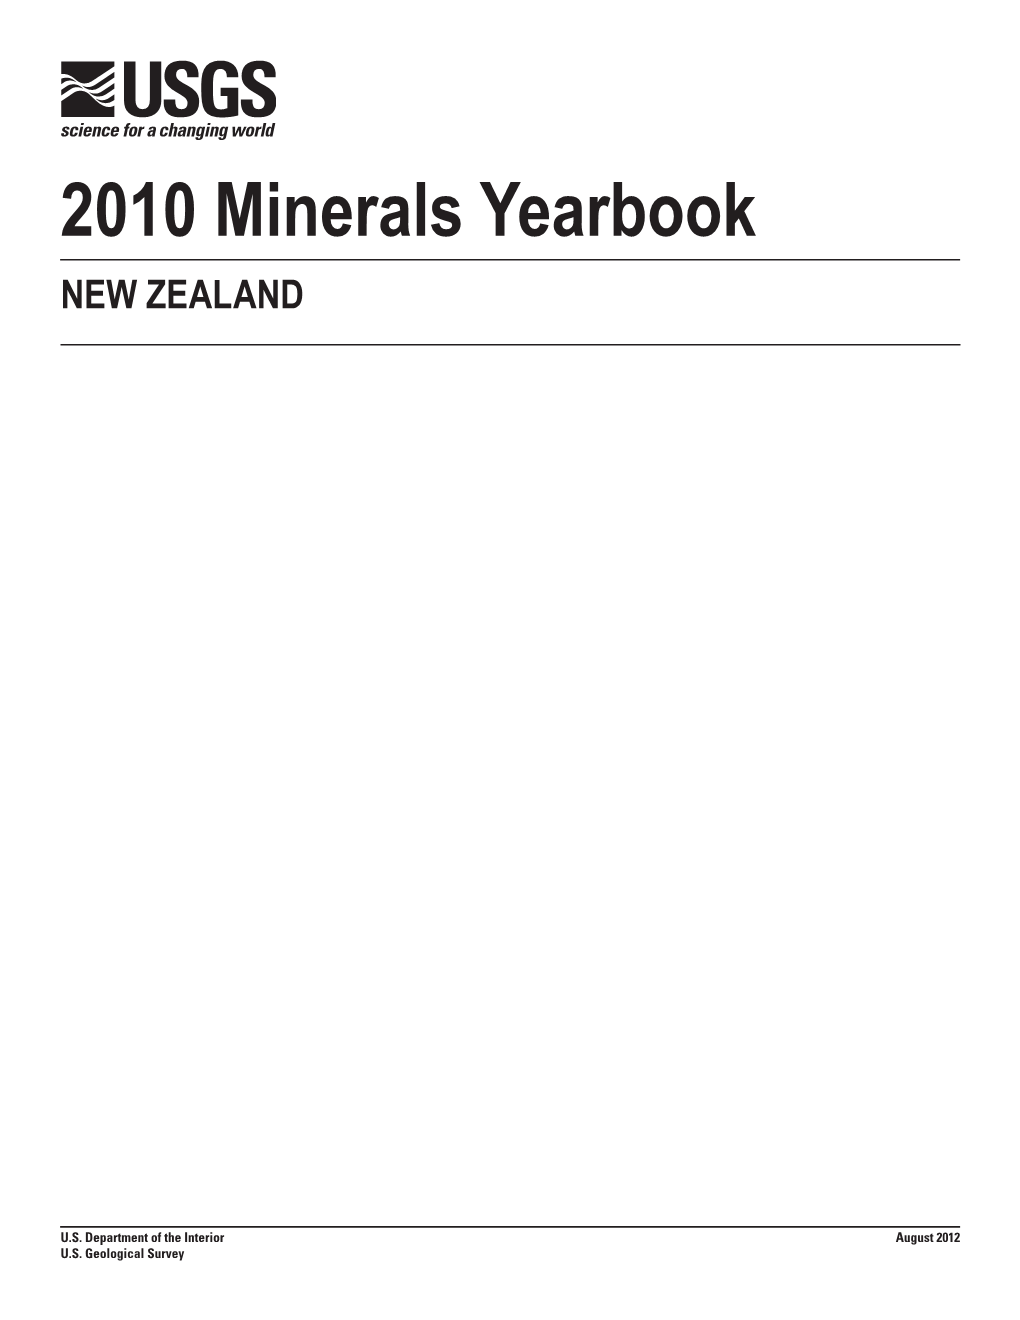 The Mineral Industry of New Zealand in 2010